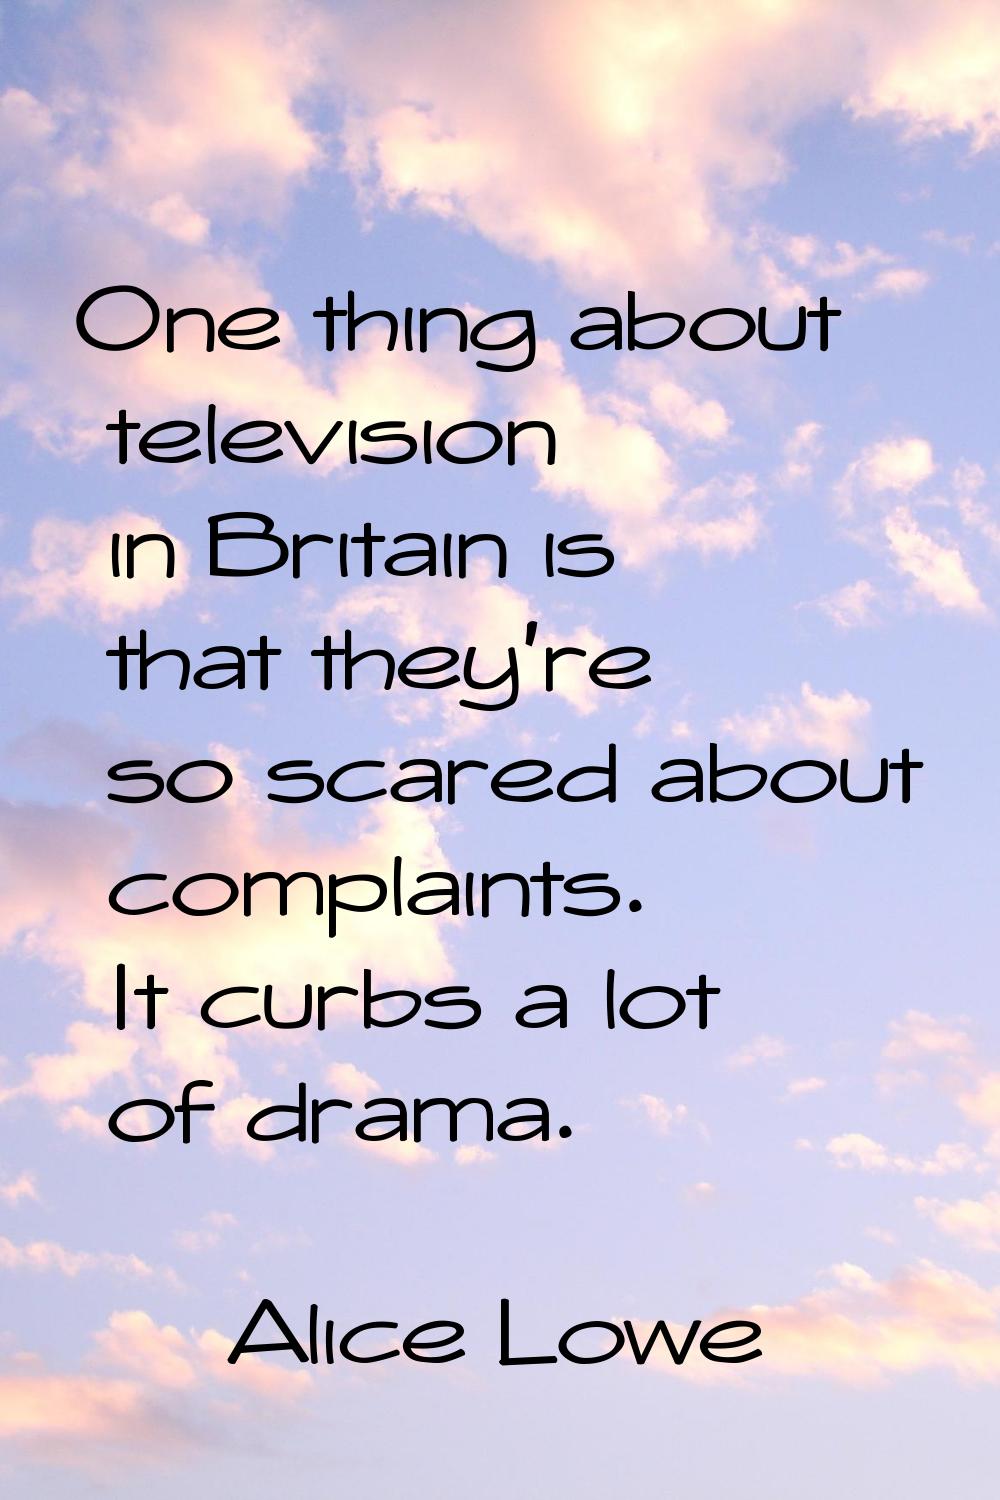 One thing about television in Britain is that they're so scared about complaints. It curbs a lot of